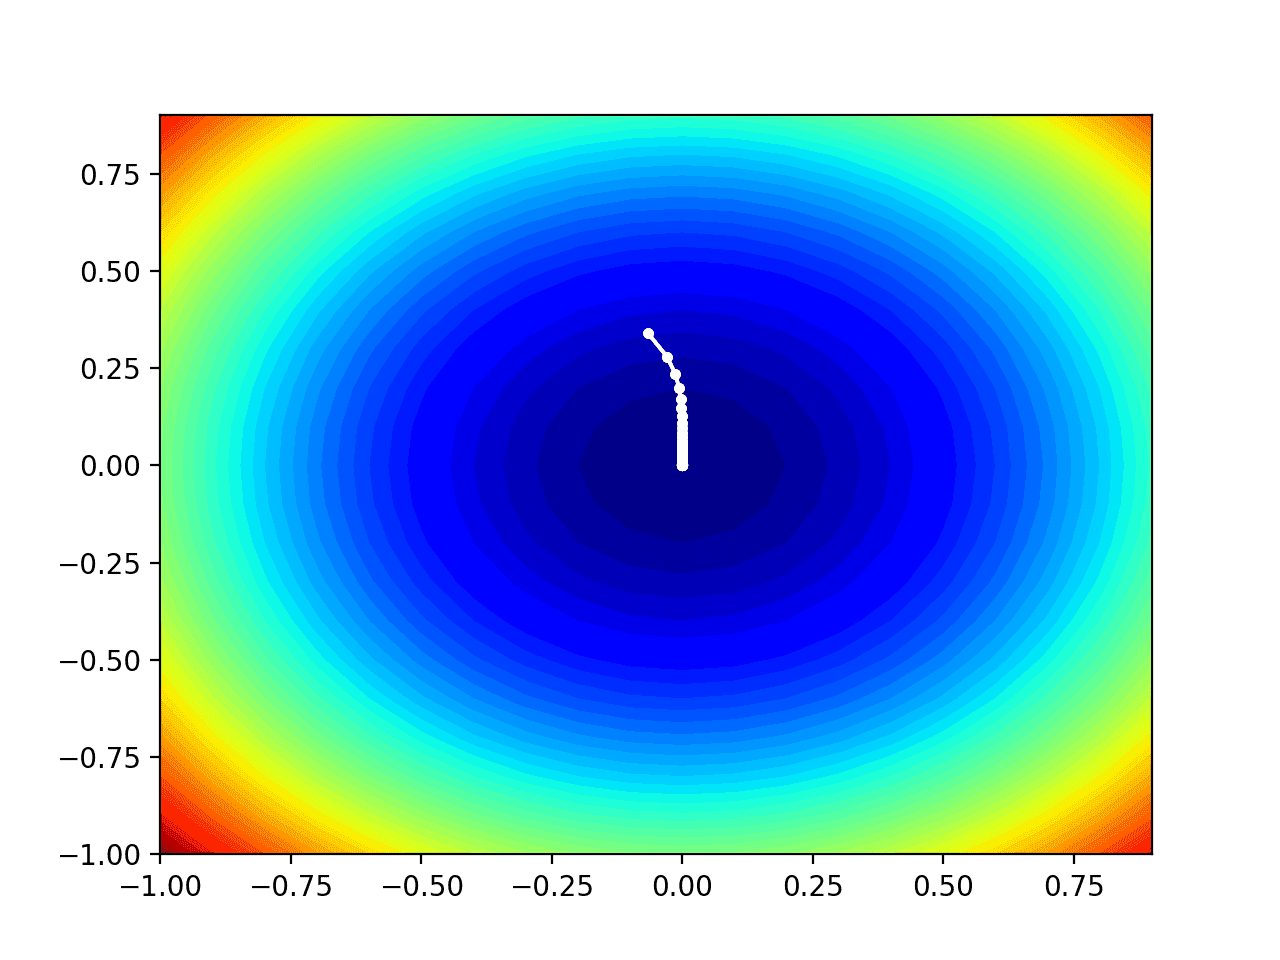 Contour Plot of the Test Objective Function With AdaGrad Search Results Shown